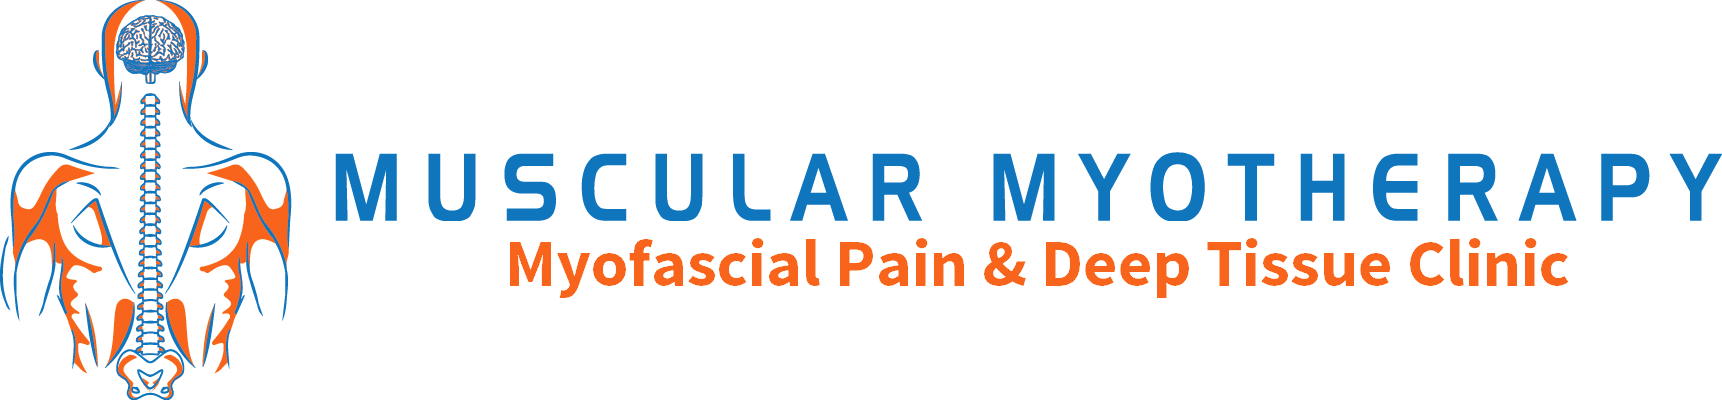 Muscular Myotherapy | Myofascial Pain & Deep Tissue Clinic